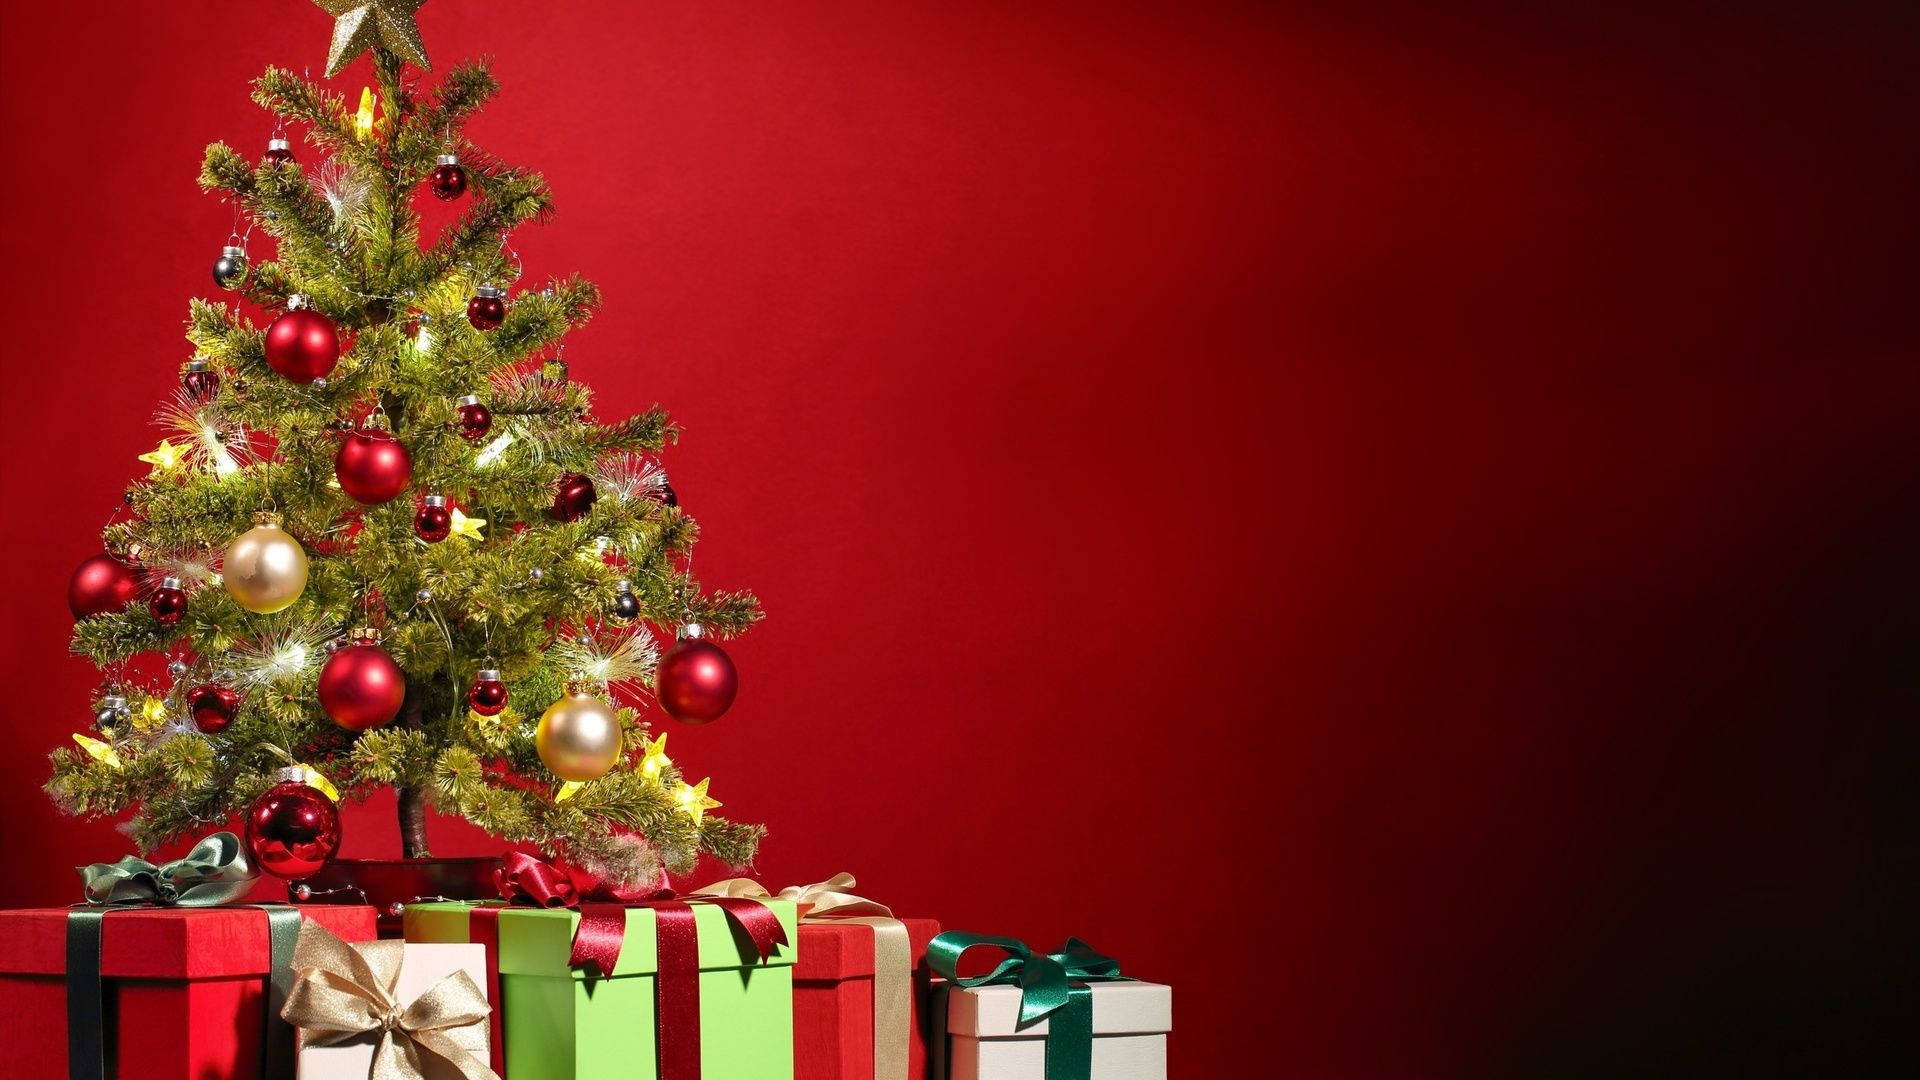 Celebrate the Holidays with a Small Christmas Tree surrounded by Gifts Wallpaper